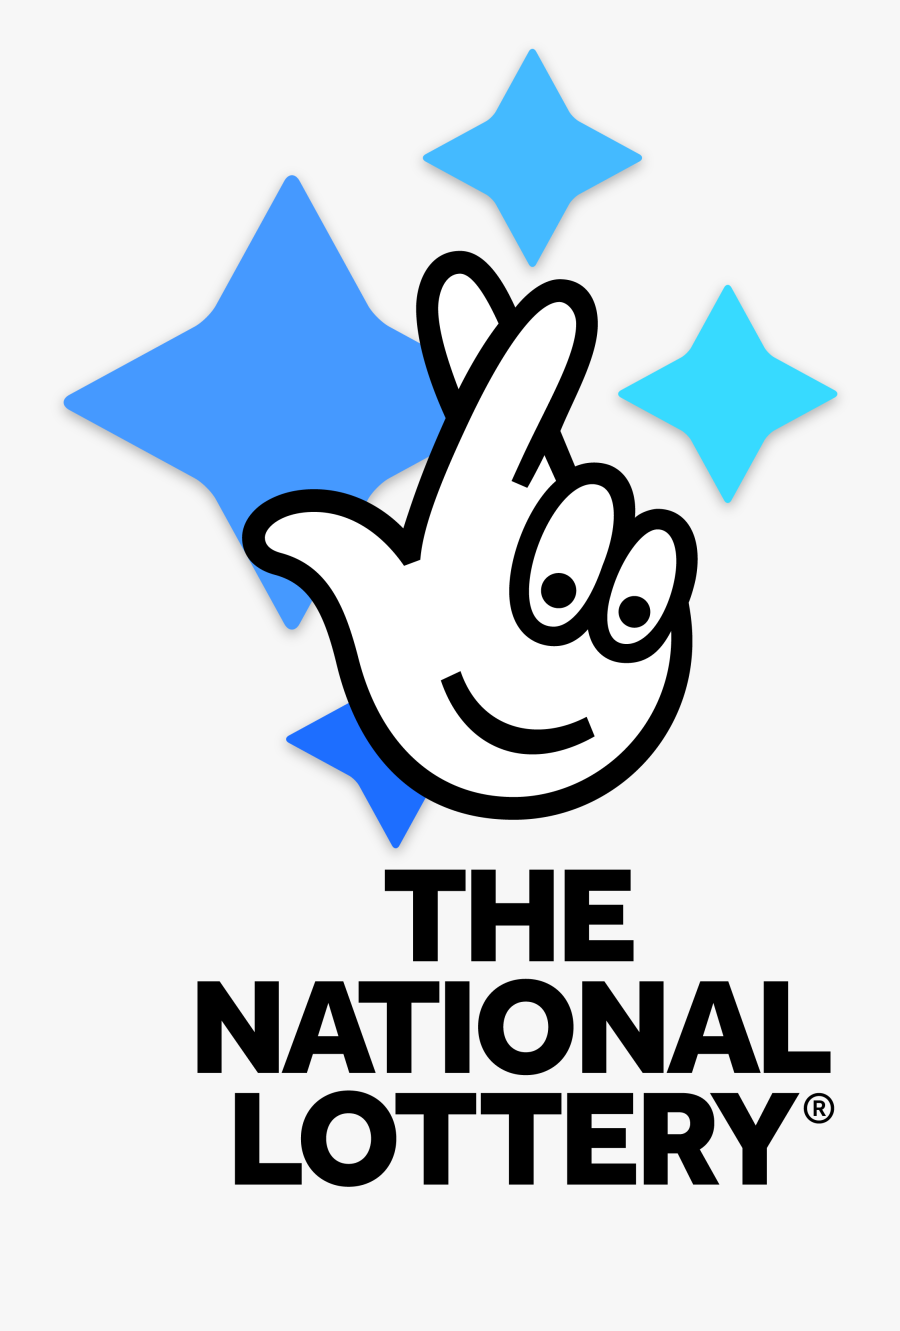 One Lucky Ticket Holder Scoops £4million Lotto Jackpot - National Lottery Uk, Transparent Clipart